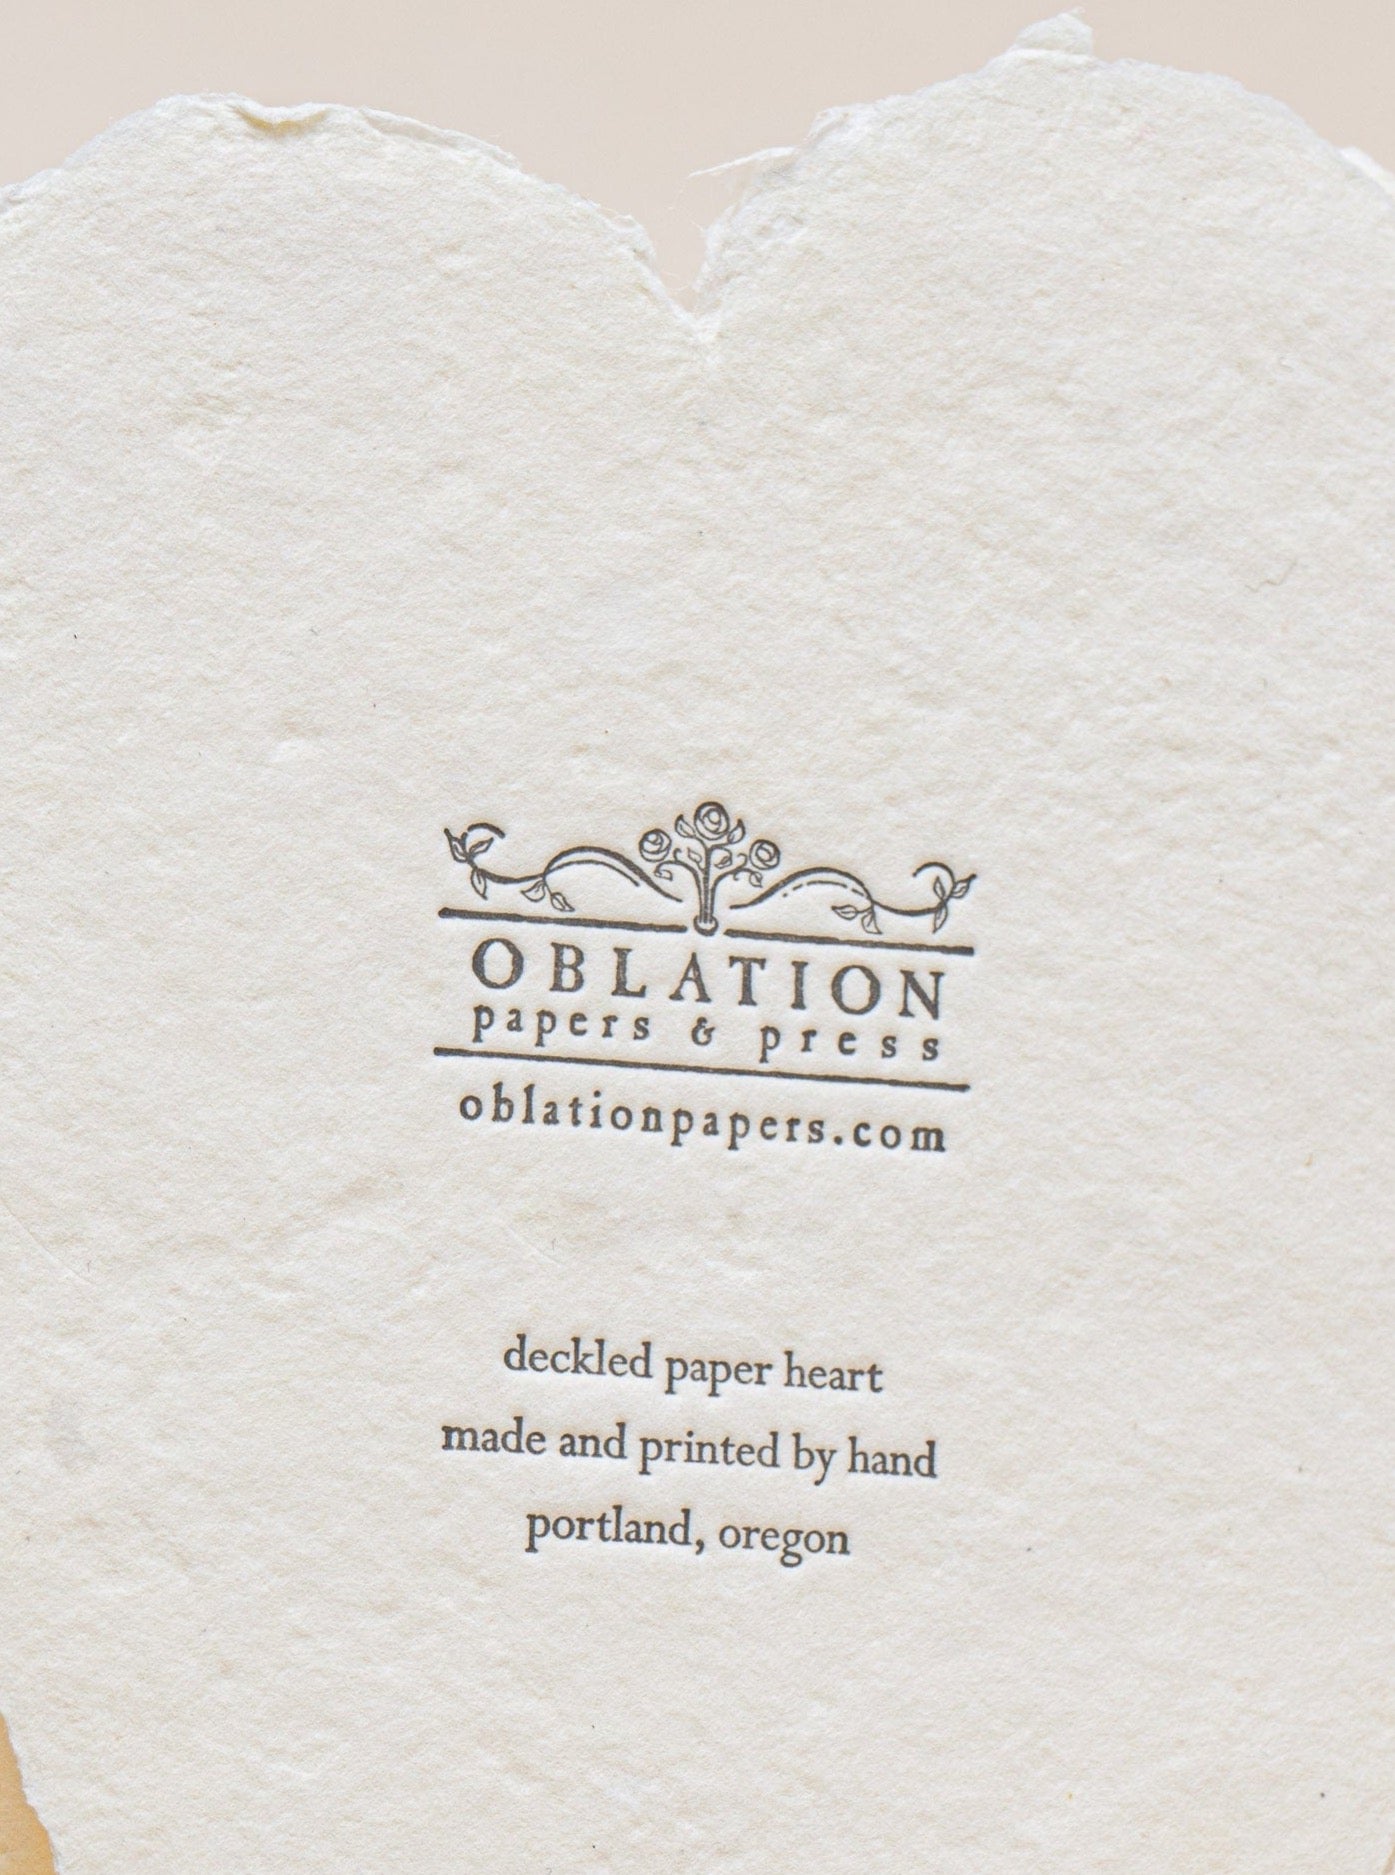 A Leo Tolstoy Card made of cream paper with the word "oblation" letterpress printed on a heart.